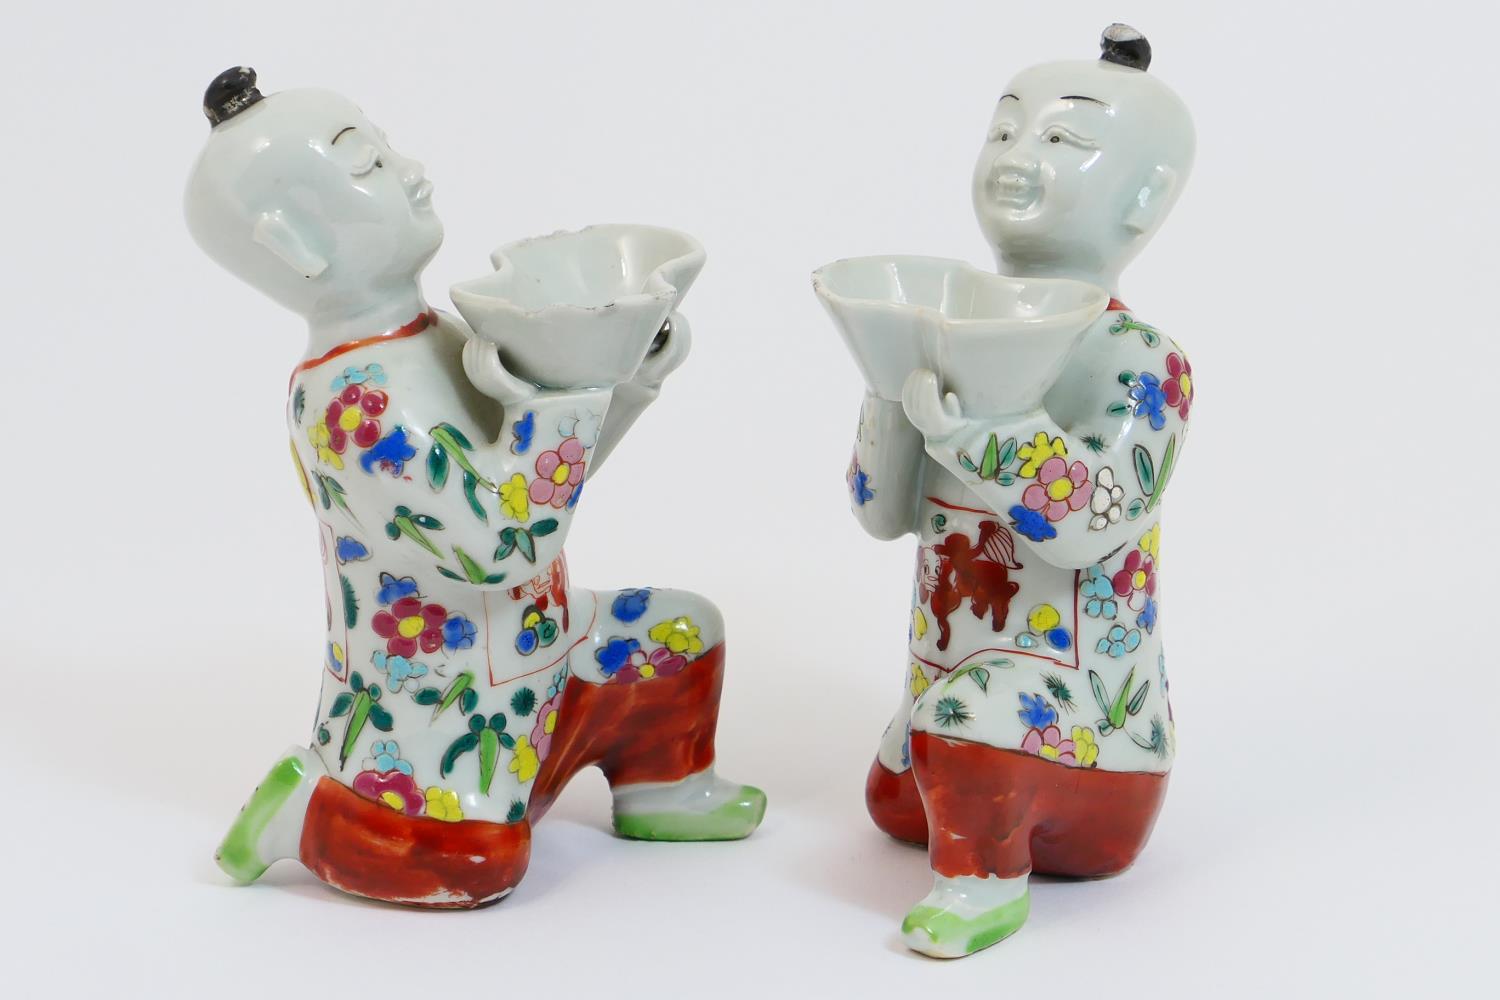 Pair of Chinese porcelain incense burners, 19th Century, modelled as boys kneeling and supporting